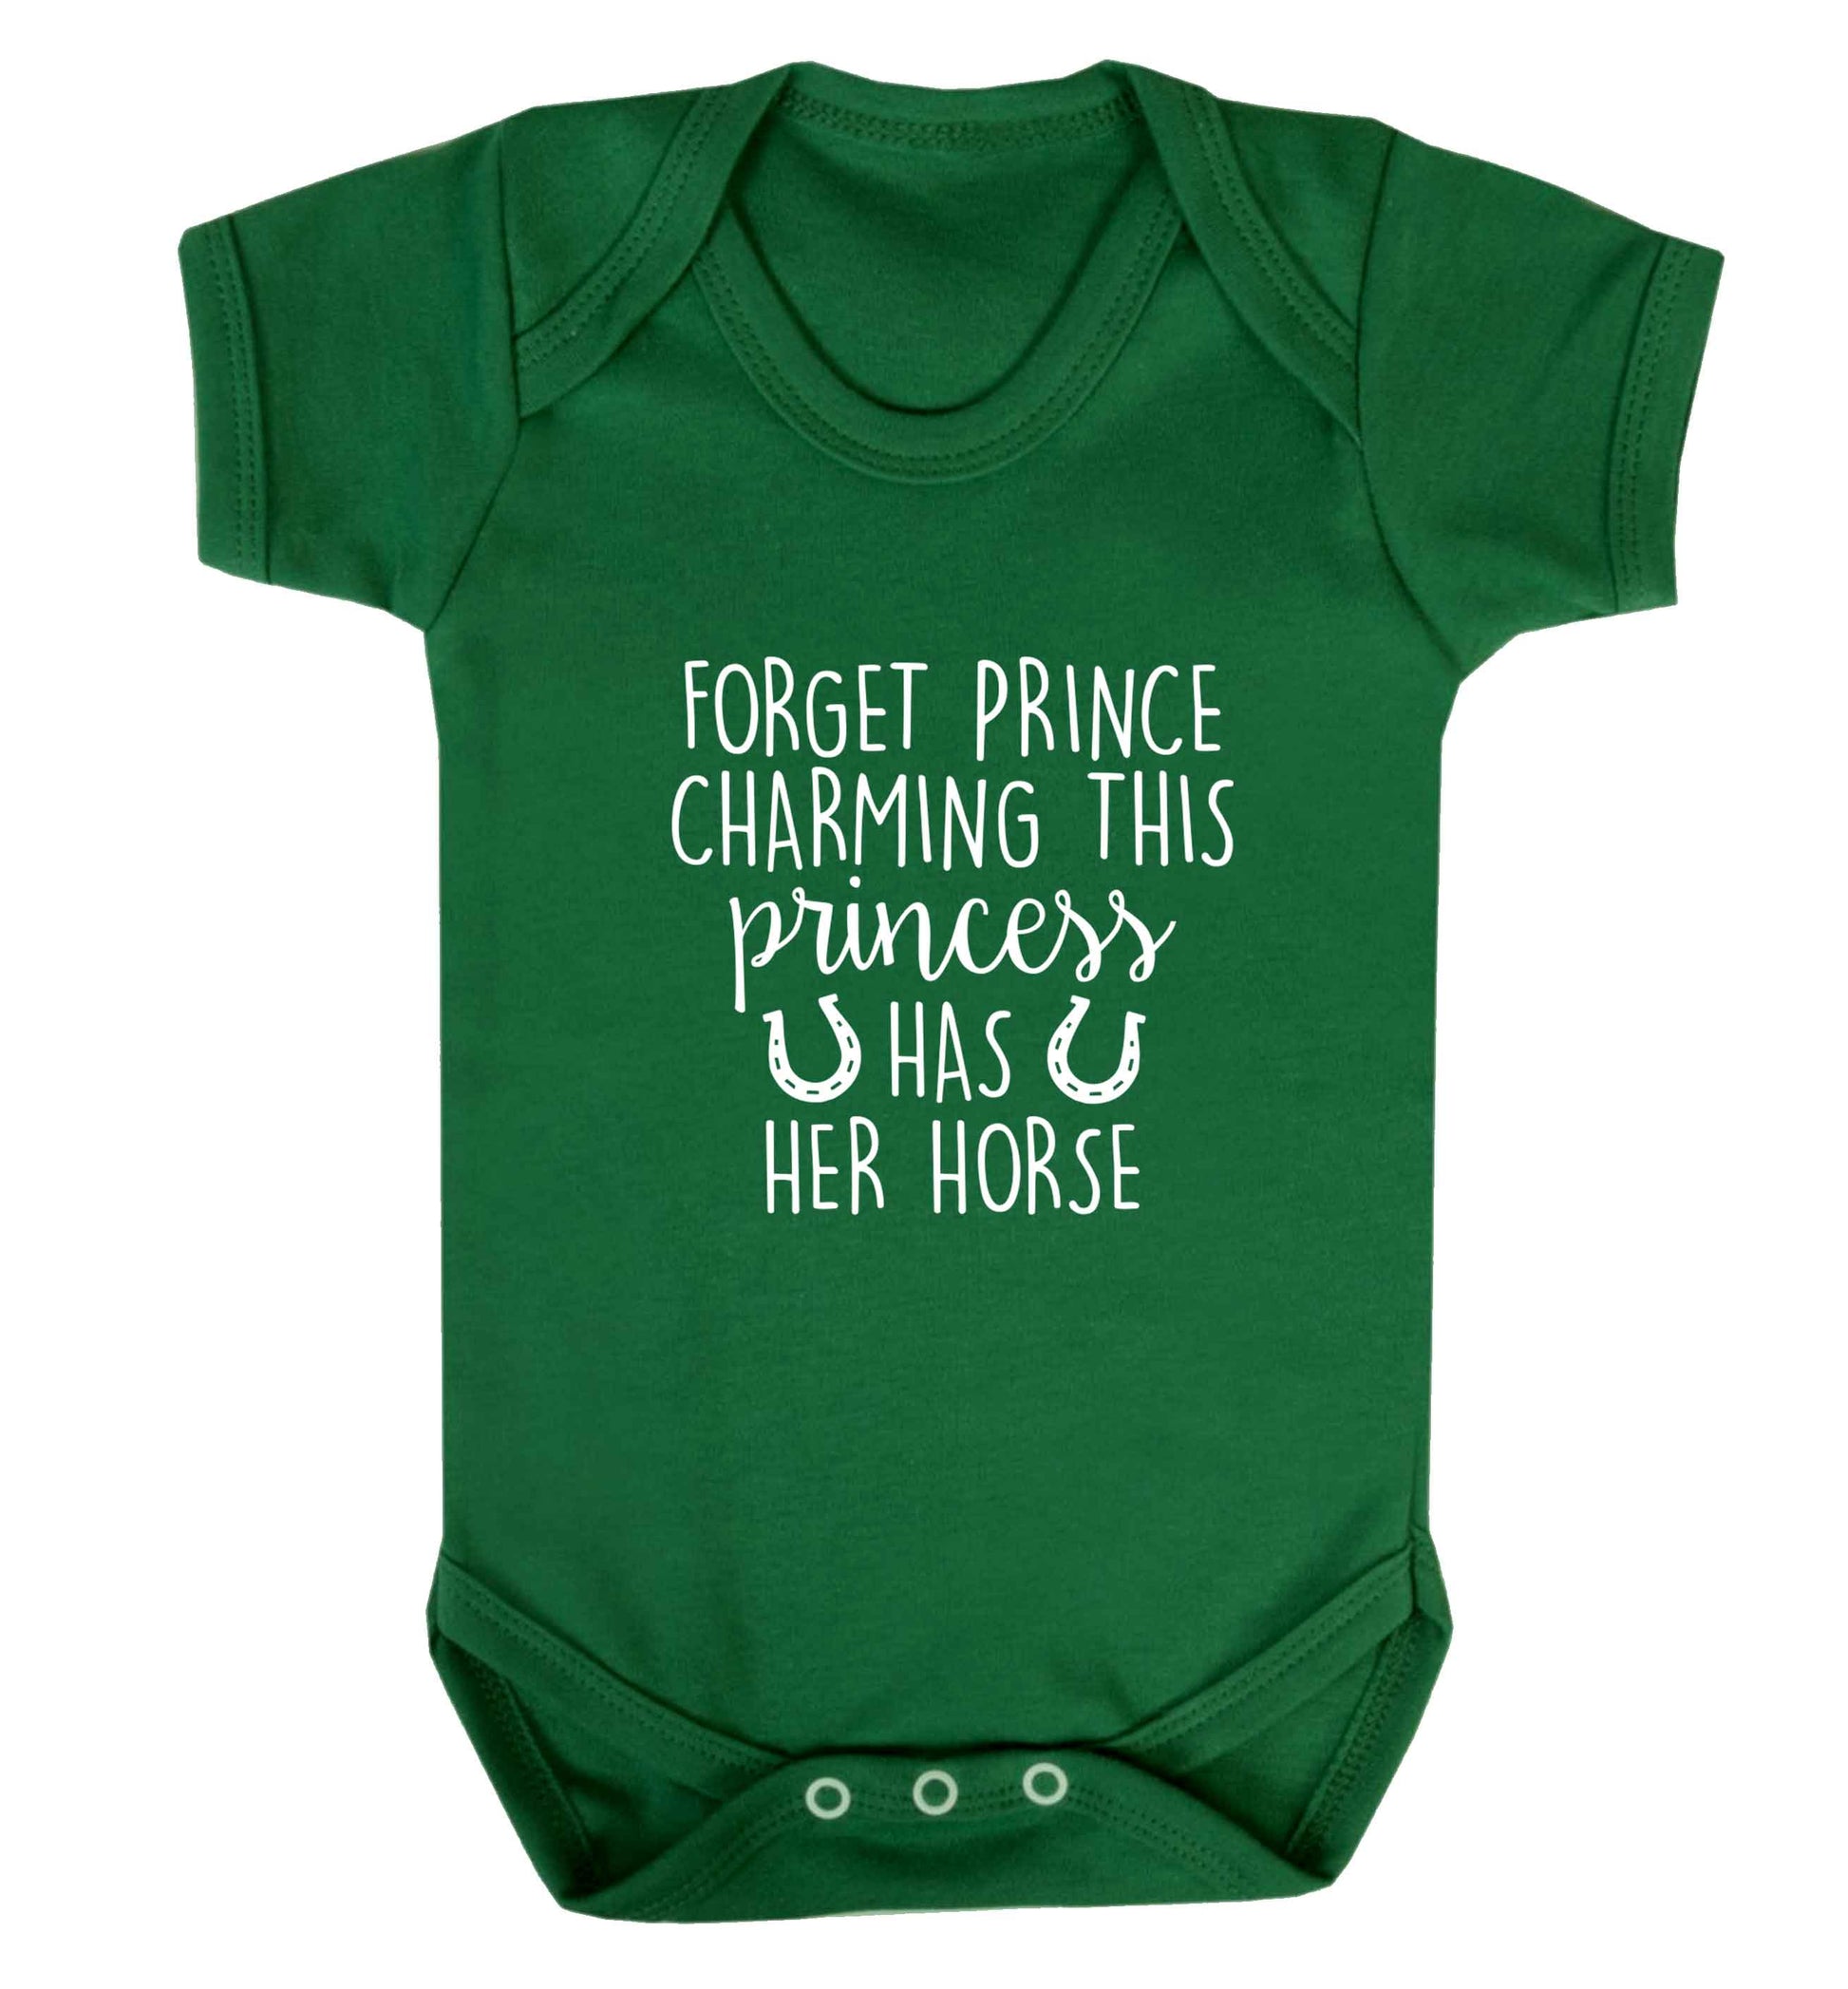 Forget prince charming this princess has her horse baby vest green 18-24 months